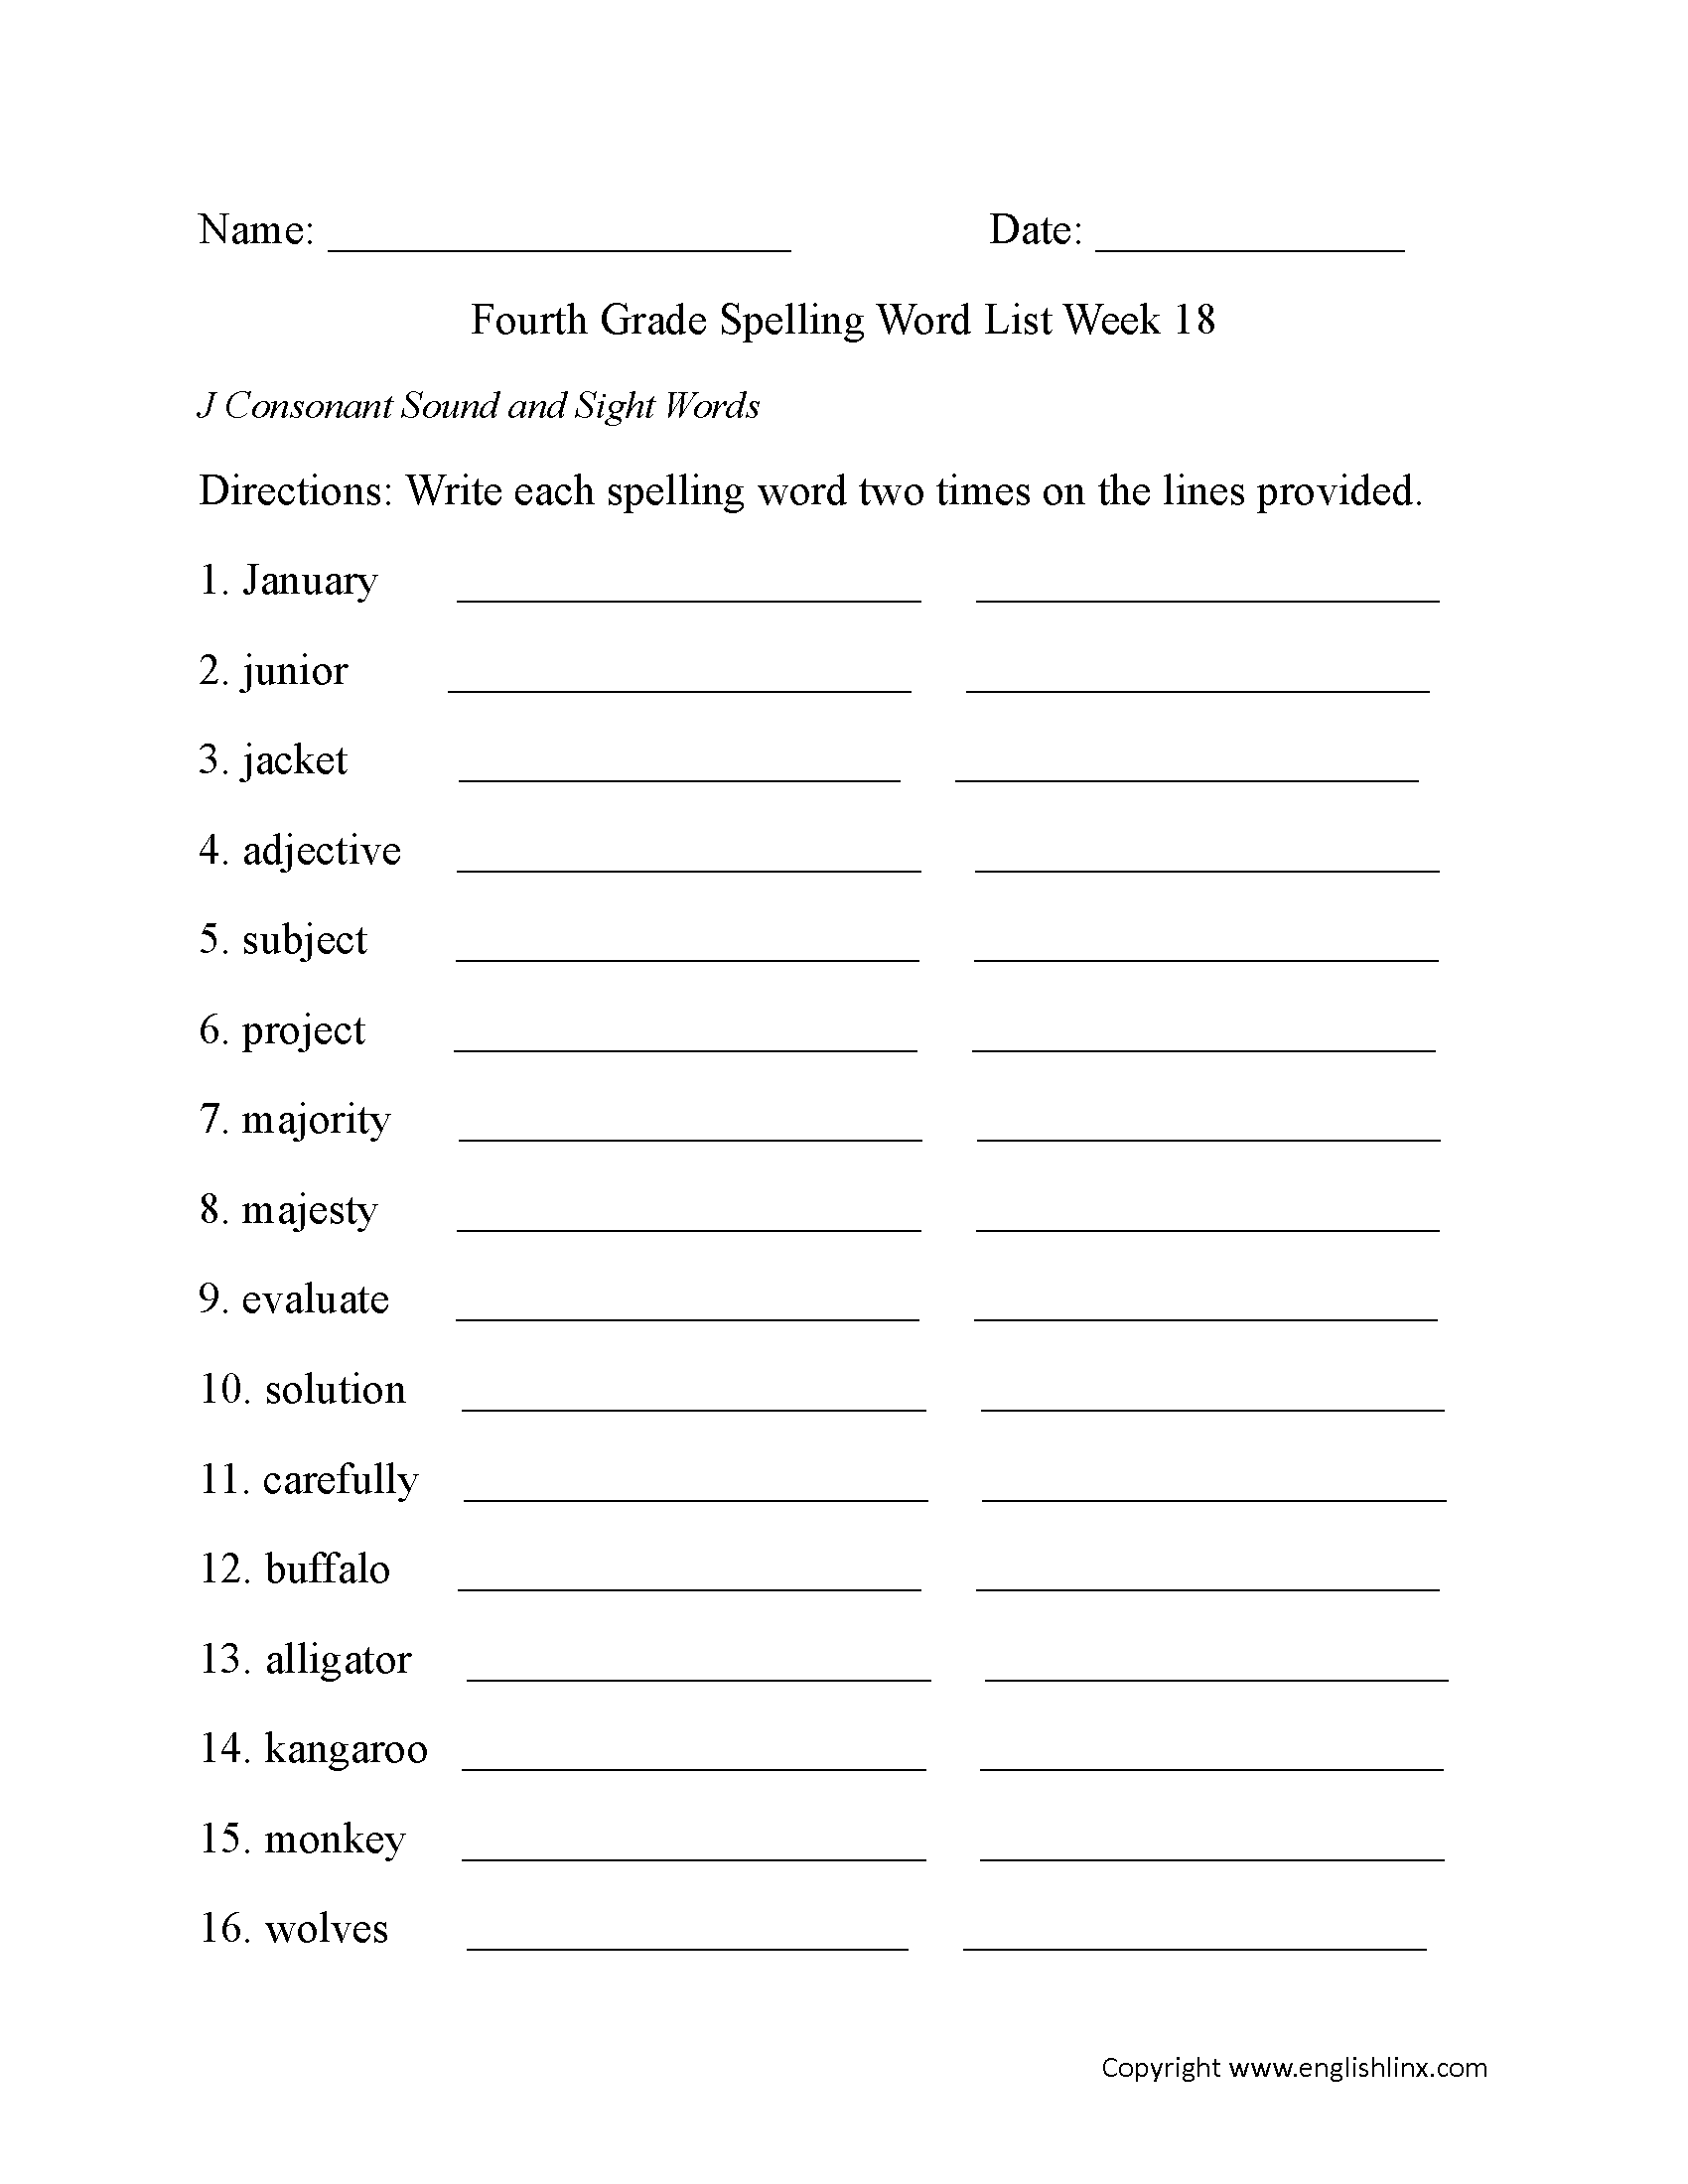 Week 18 J Consonant and Sight Words Fourth Grade Spelling Words Worksheets